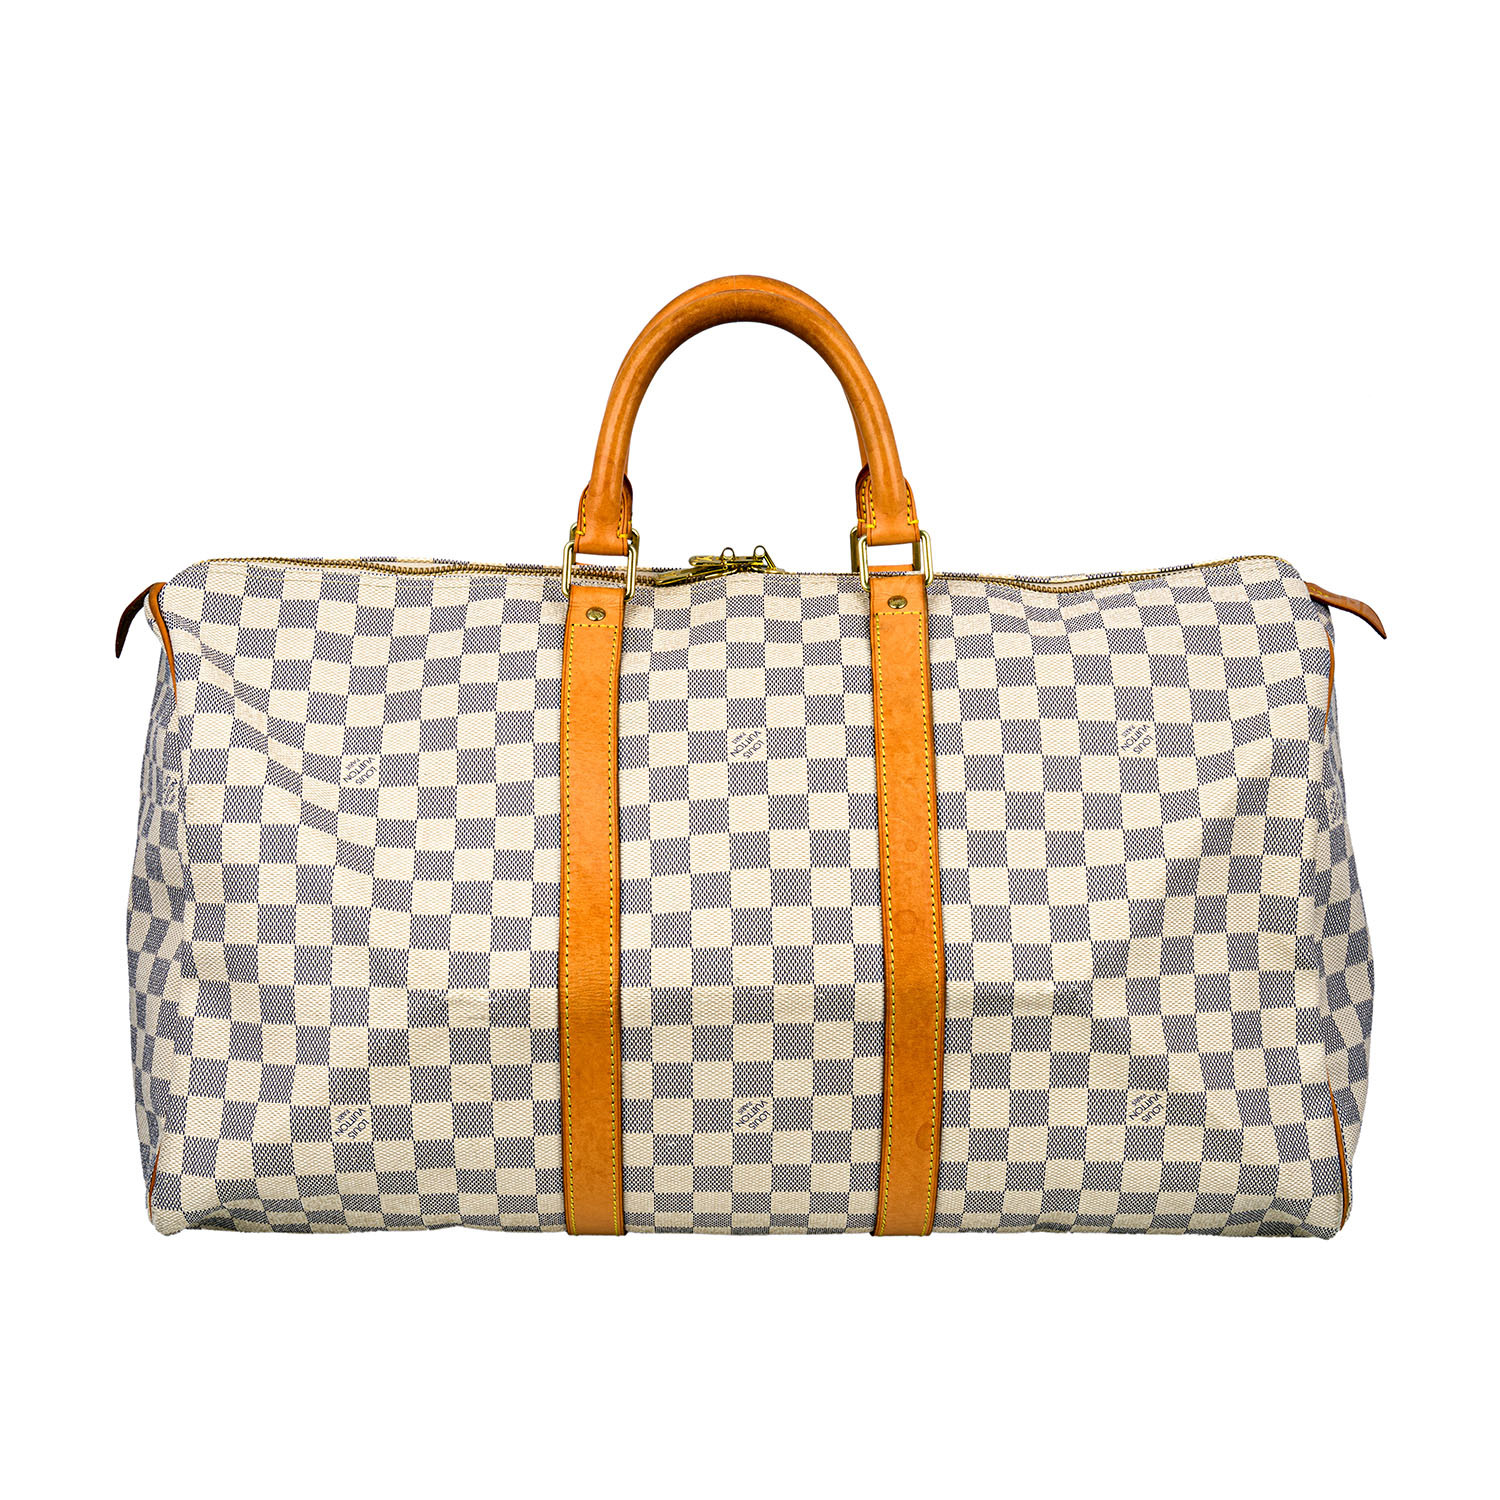 Louis Vuitton // Damier Canvas Keepall Duffle 50 Travel Bag // White // Pre-Owned - Hermes ...